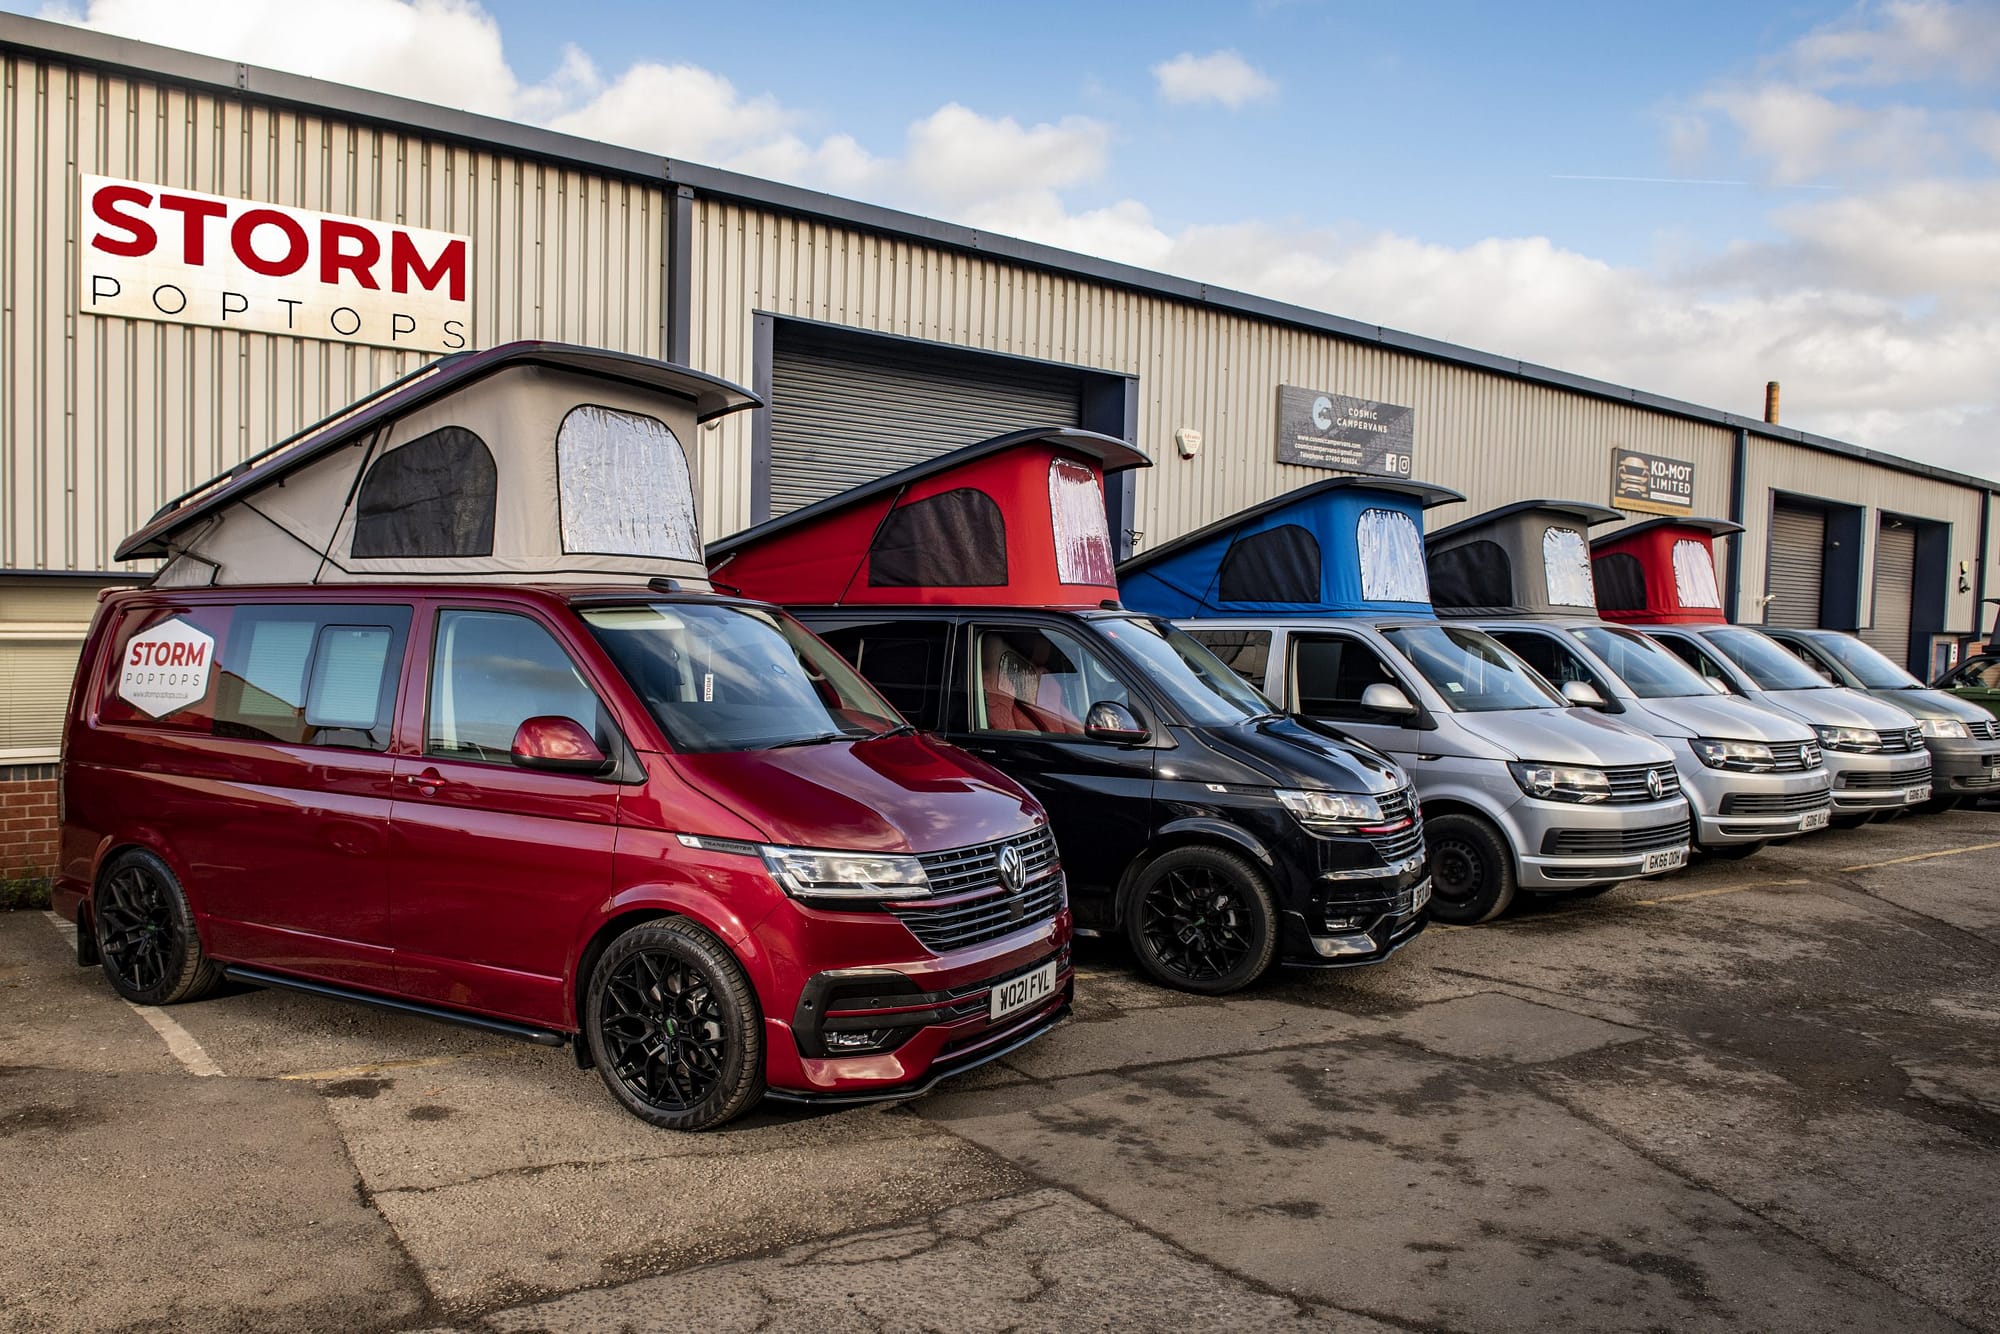 Cosmic Campervans is a culmination of years of experience, expertise and knowledge in the Campervan Conversion industry.